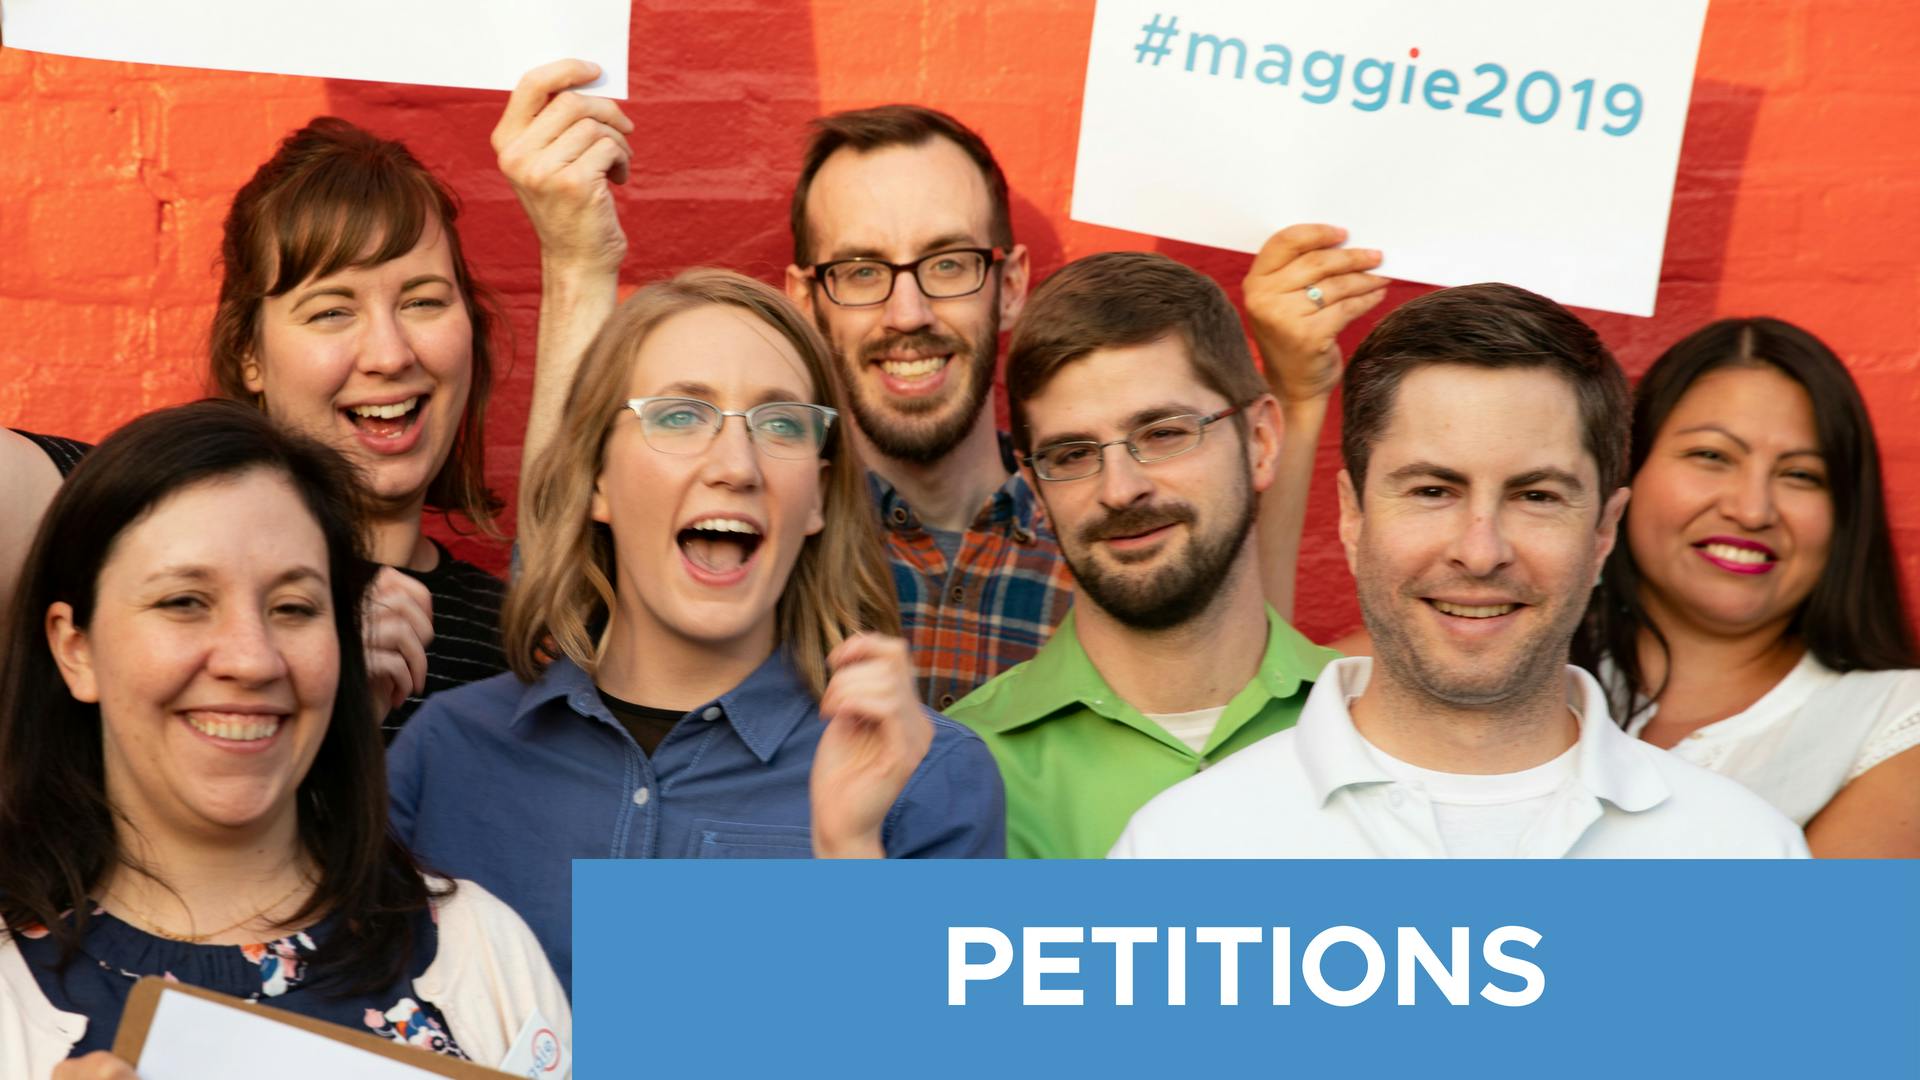 Petition Drive Drive for Maggie O'Keefe - September 23rd